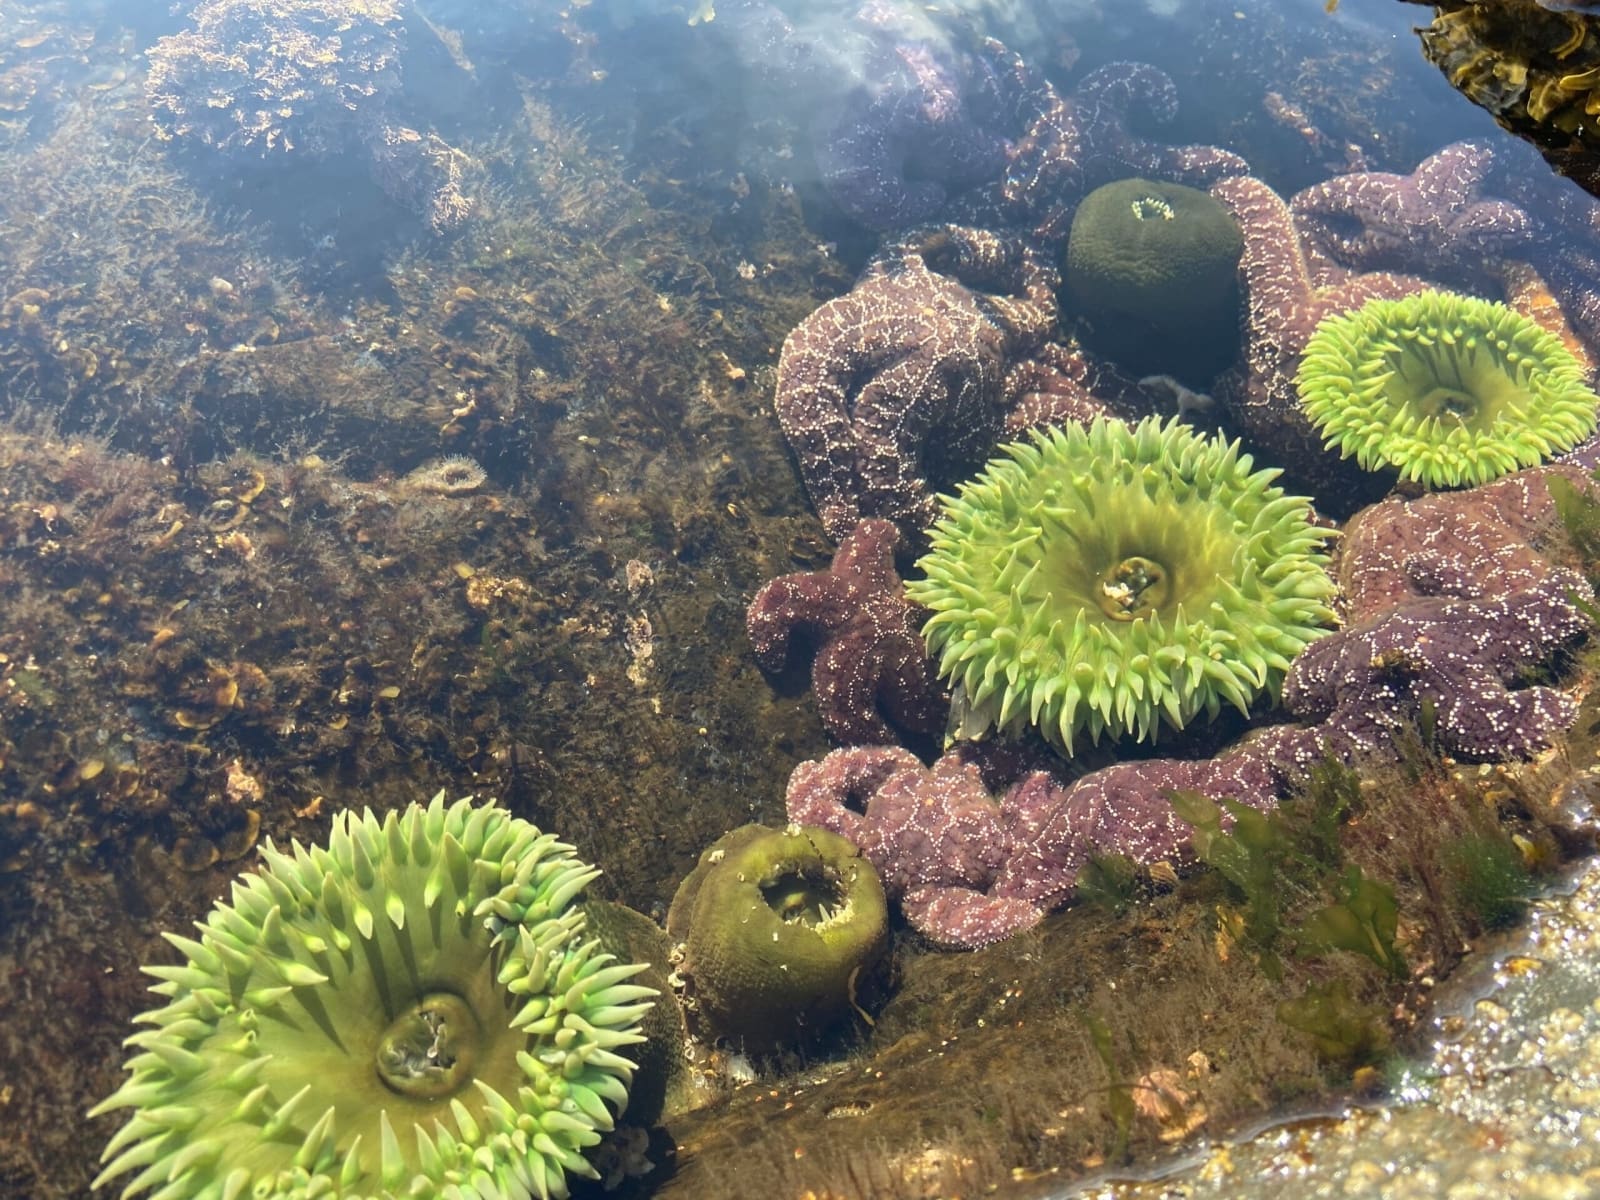 Ochre Stars and Green Anemones in a tide pool